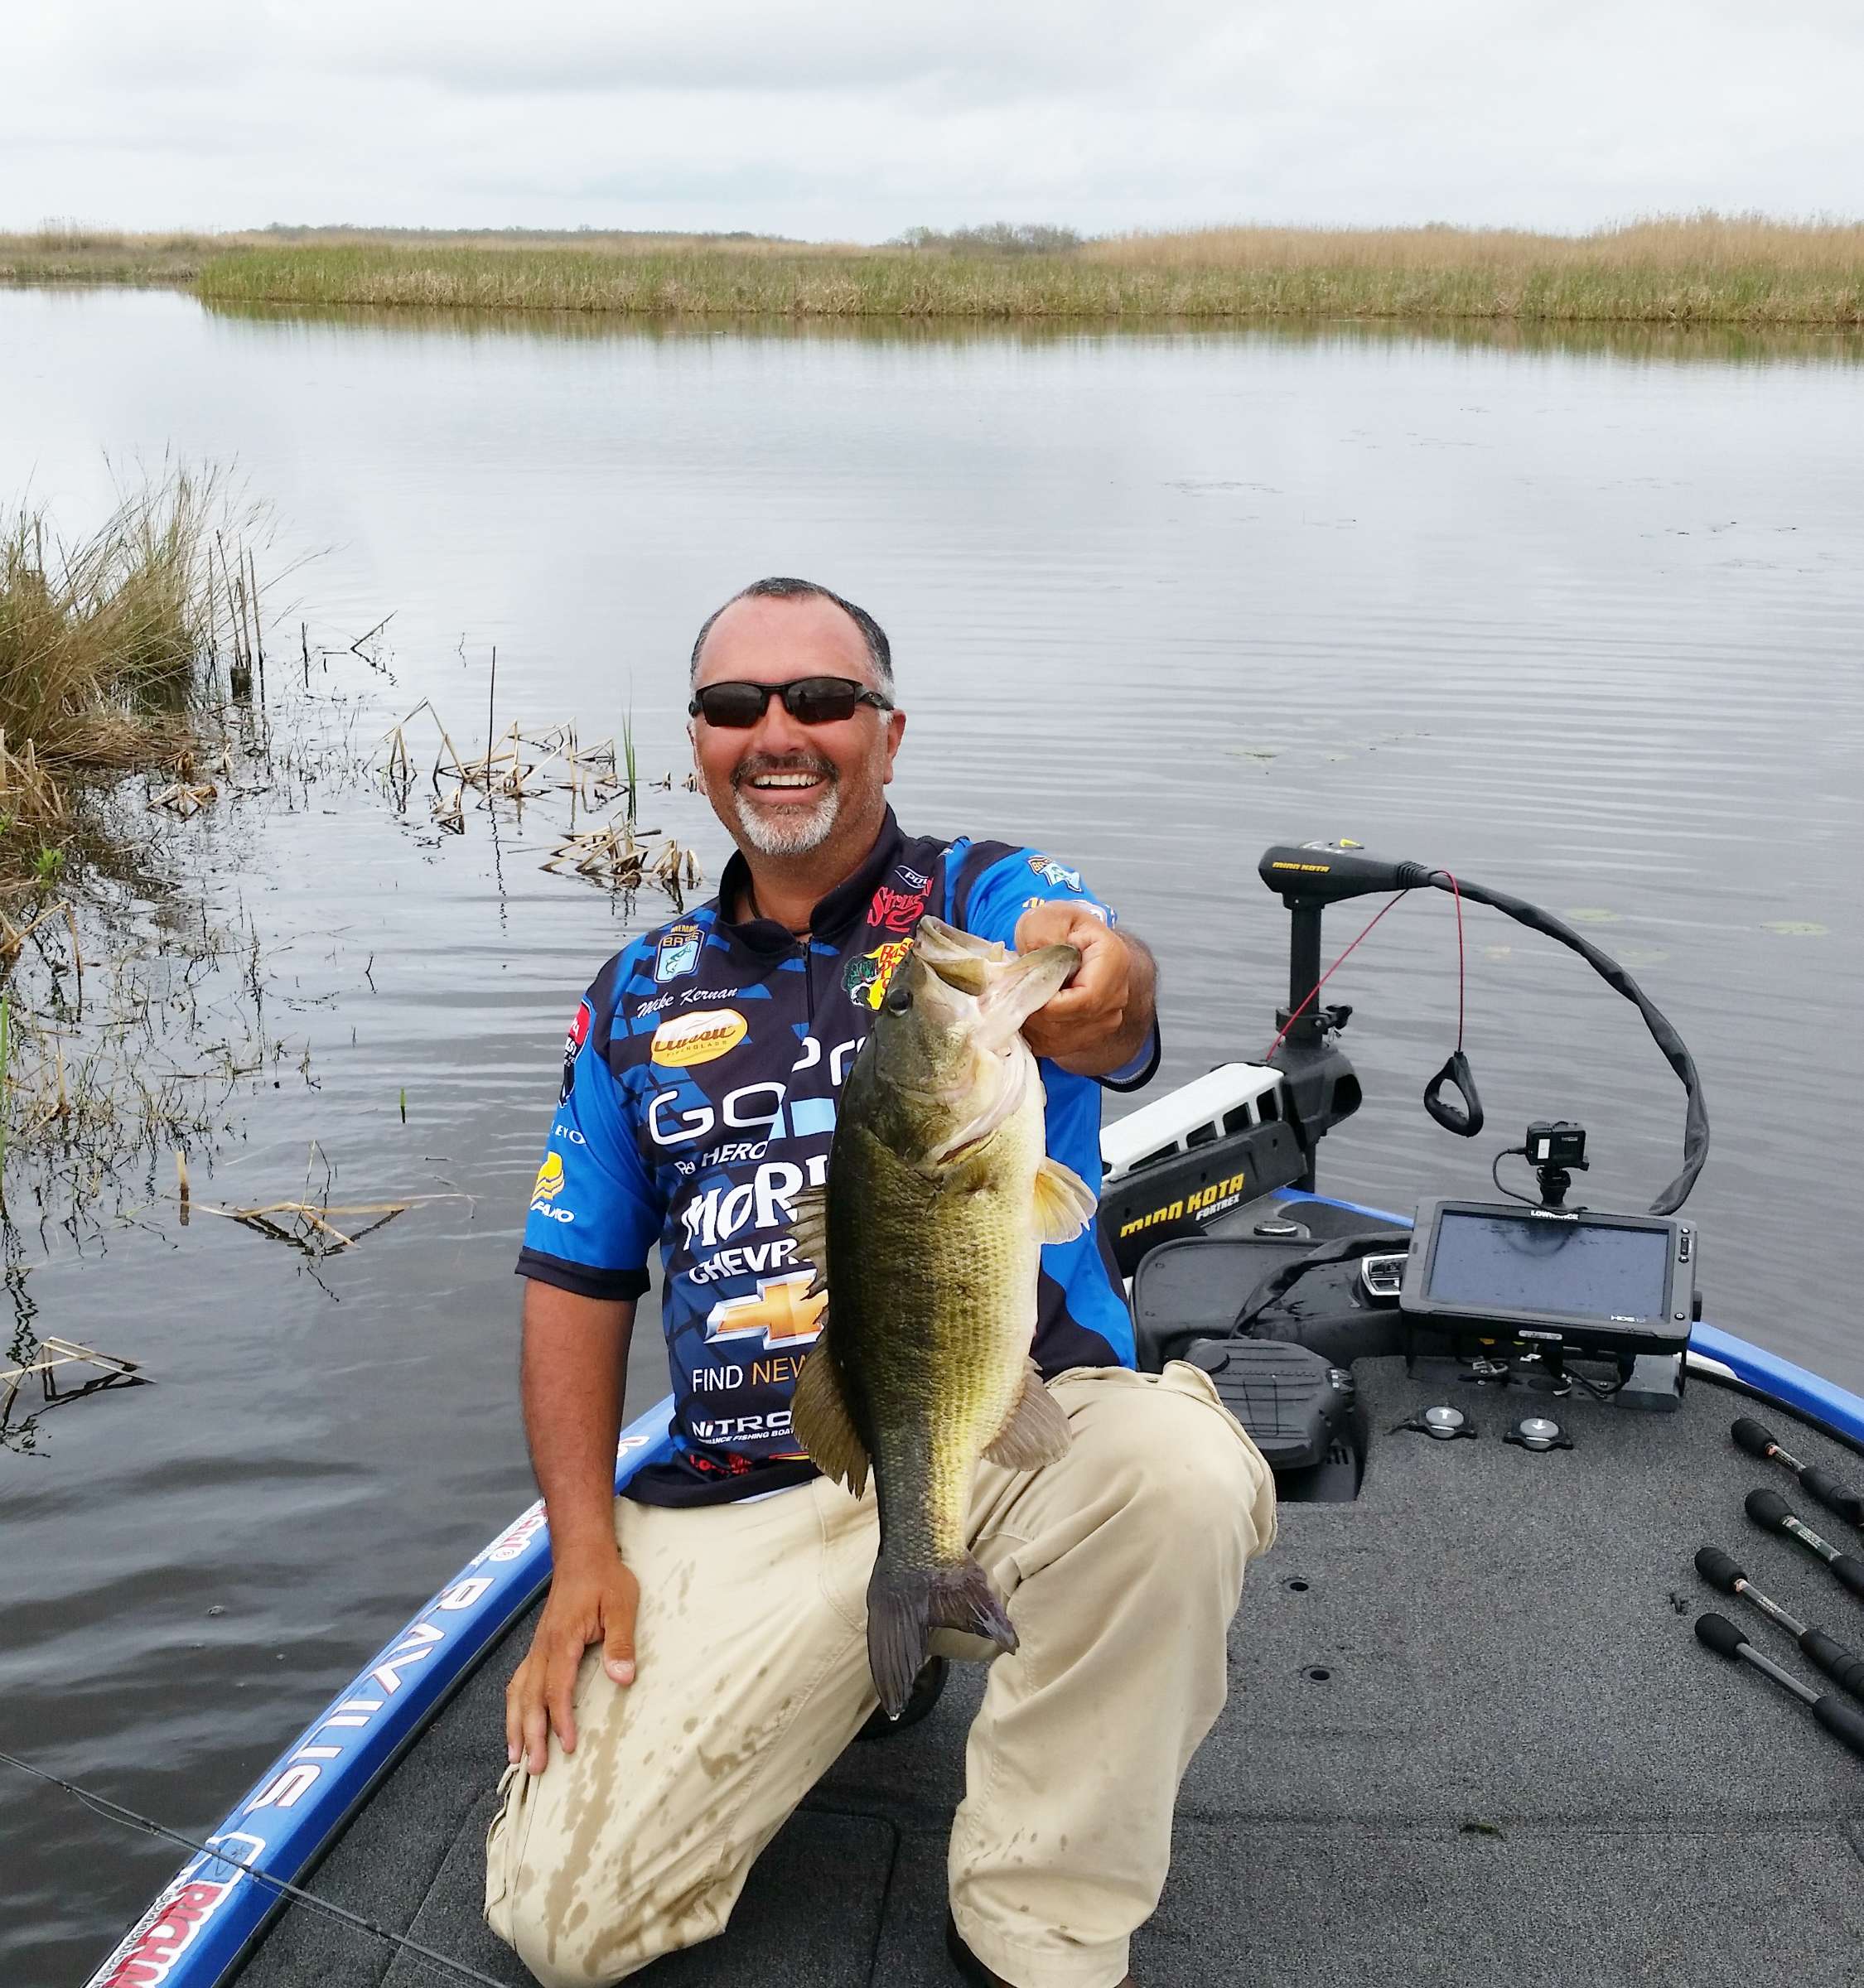 Mike Kernan with a solid 6-pound fish, his second keeper of Day 1.
<br>Photo by Bassmaster Marshal Steve Bellon